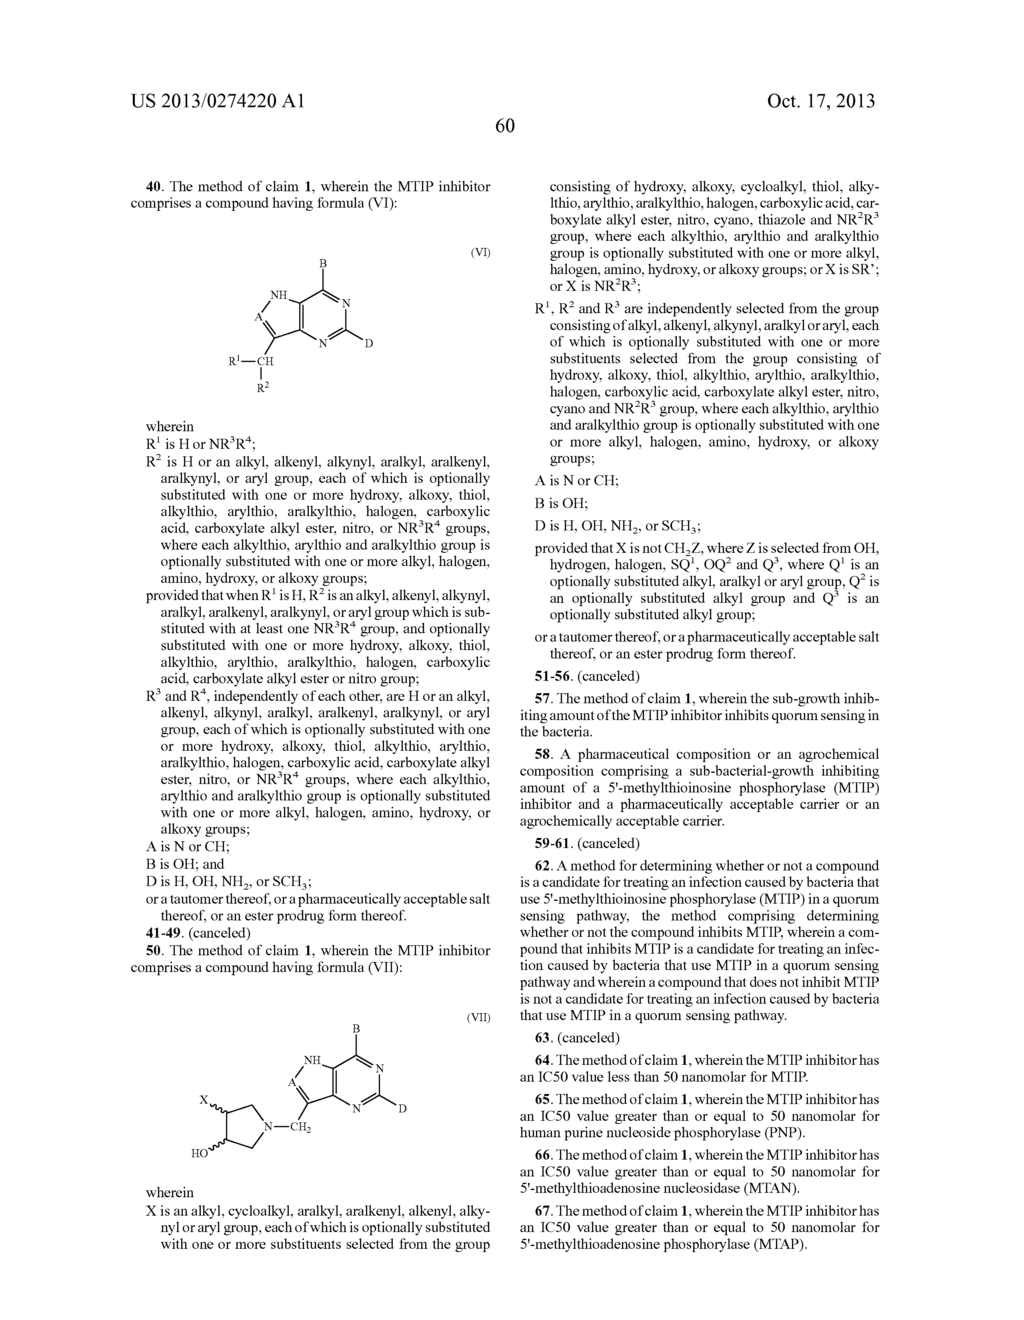 METHODS, ASSAYS AND COMPOUNDS FOR TREATING BACTERIAL INFECTIONS BY     INHIBITING METHYLTHIOINOSINE PHOSPHORYLASE - diagram, schematic, and image 64